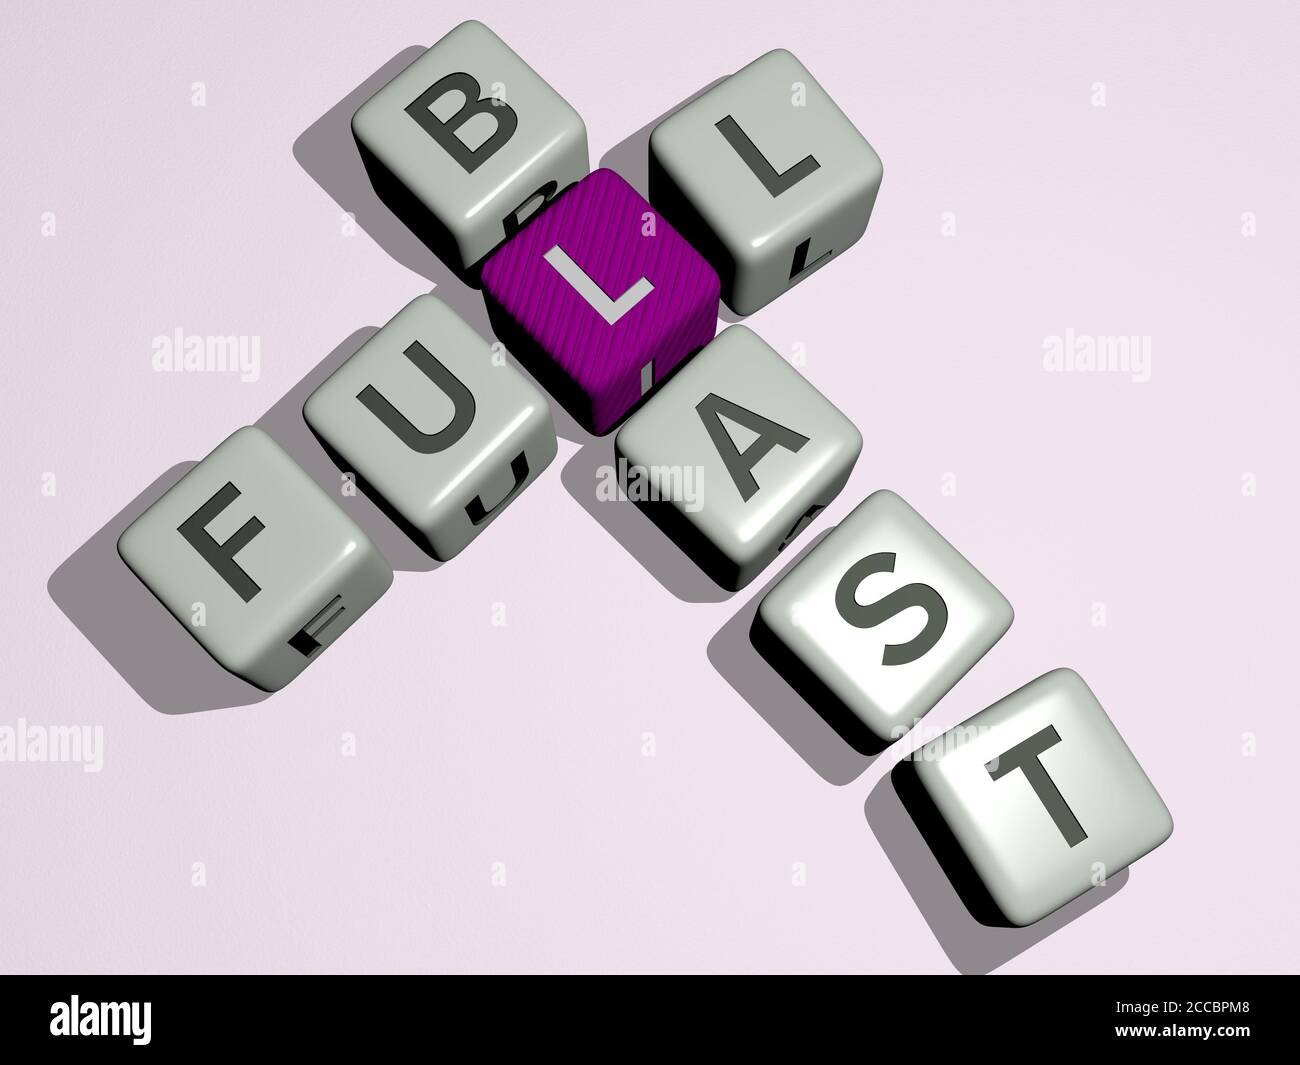 full blast crossword by cubic dice letters 3D illustration Stock Photo